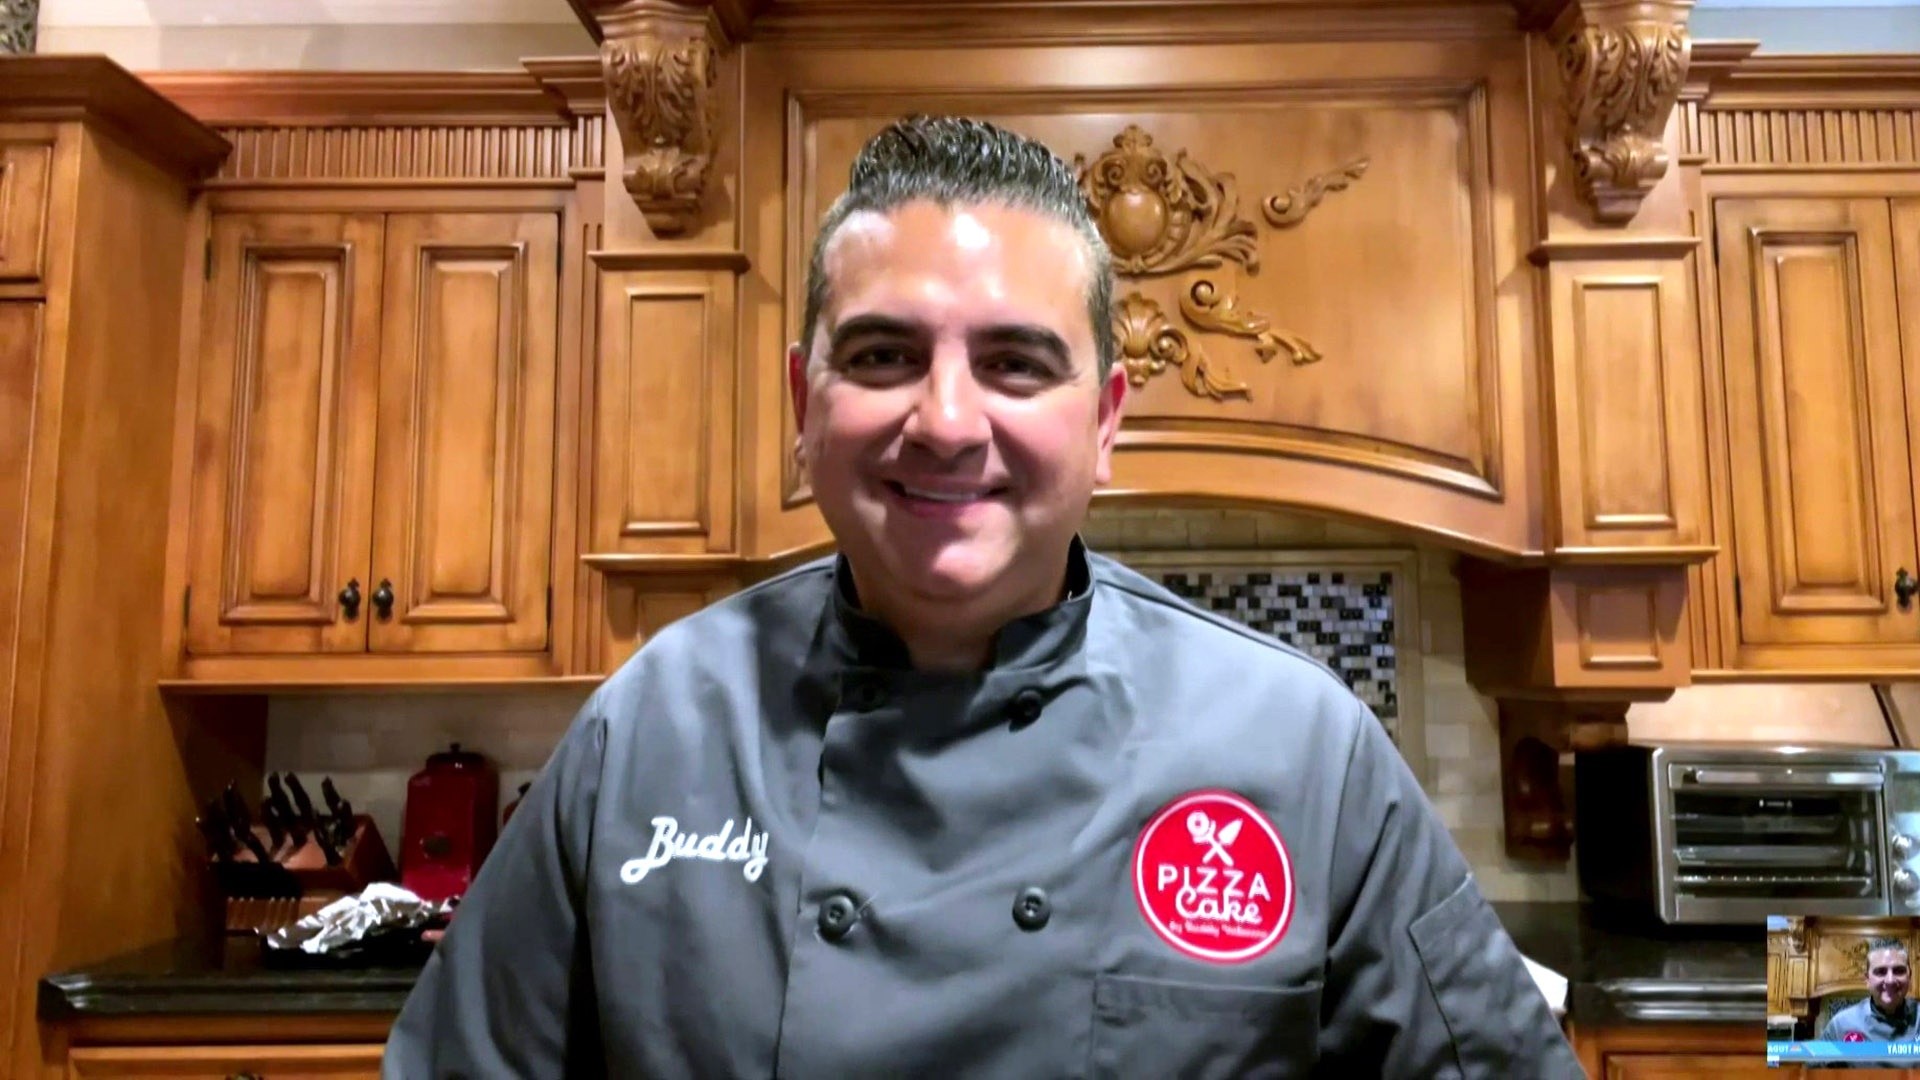 Cake Boss' Buddy Valastro shares how he's doing after hand injury